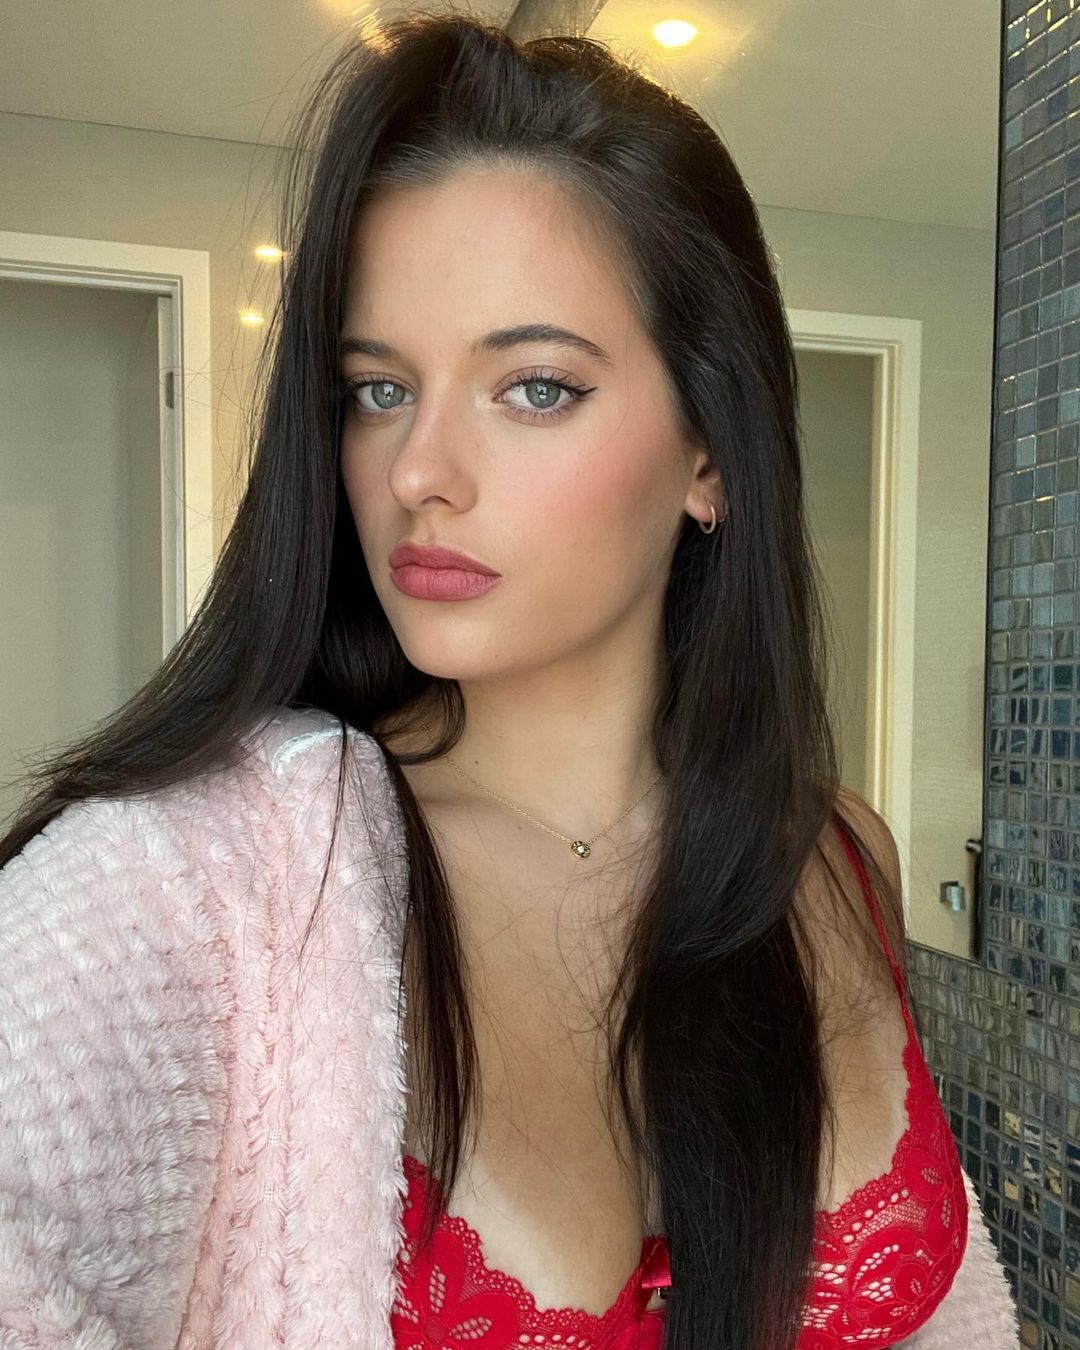 Taya Brooks Flaunts Stunning Red Forever And A Day Intimates Bra in Instagram Photos